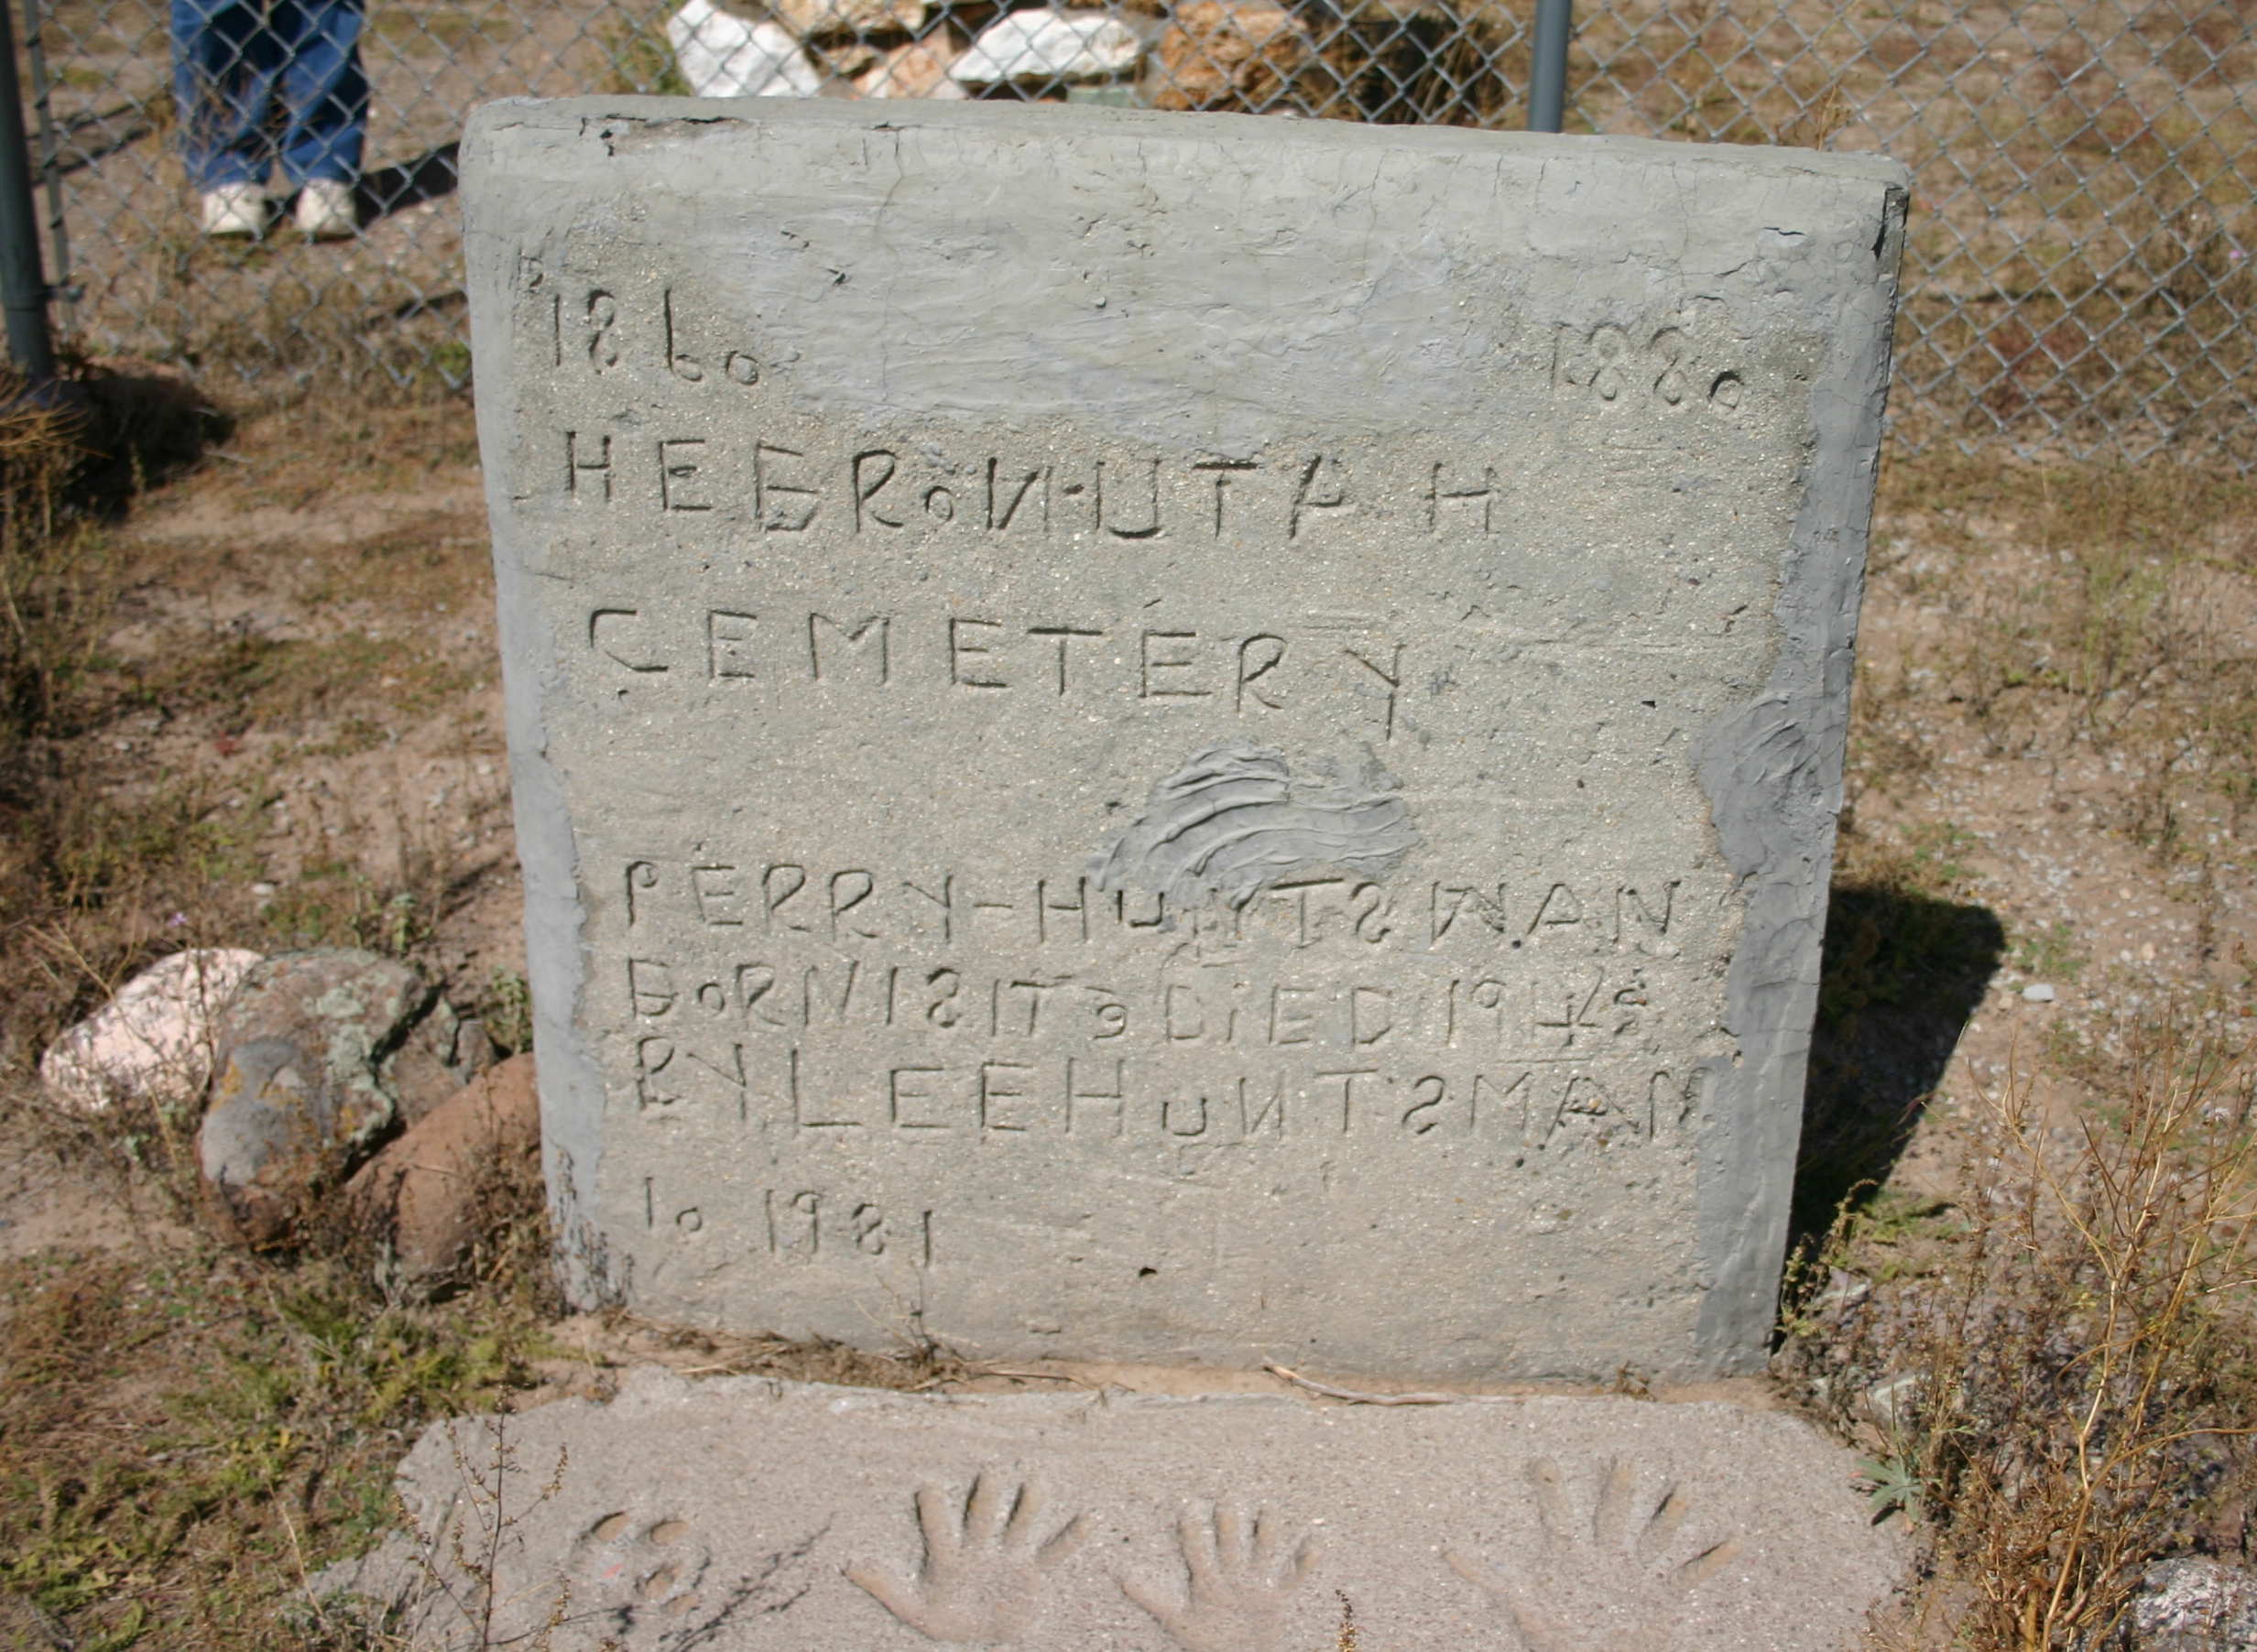 Huntsman marker at the Hebron Cemetery